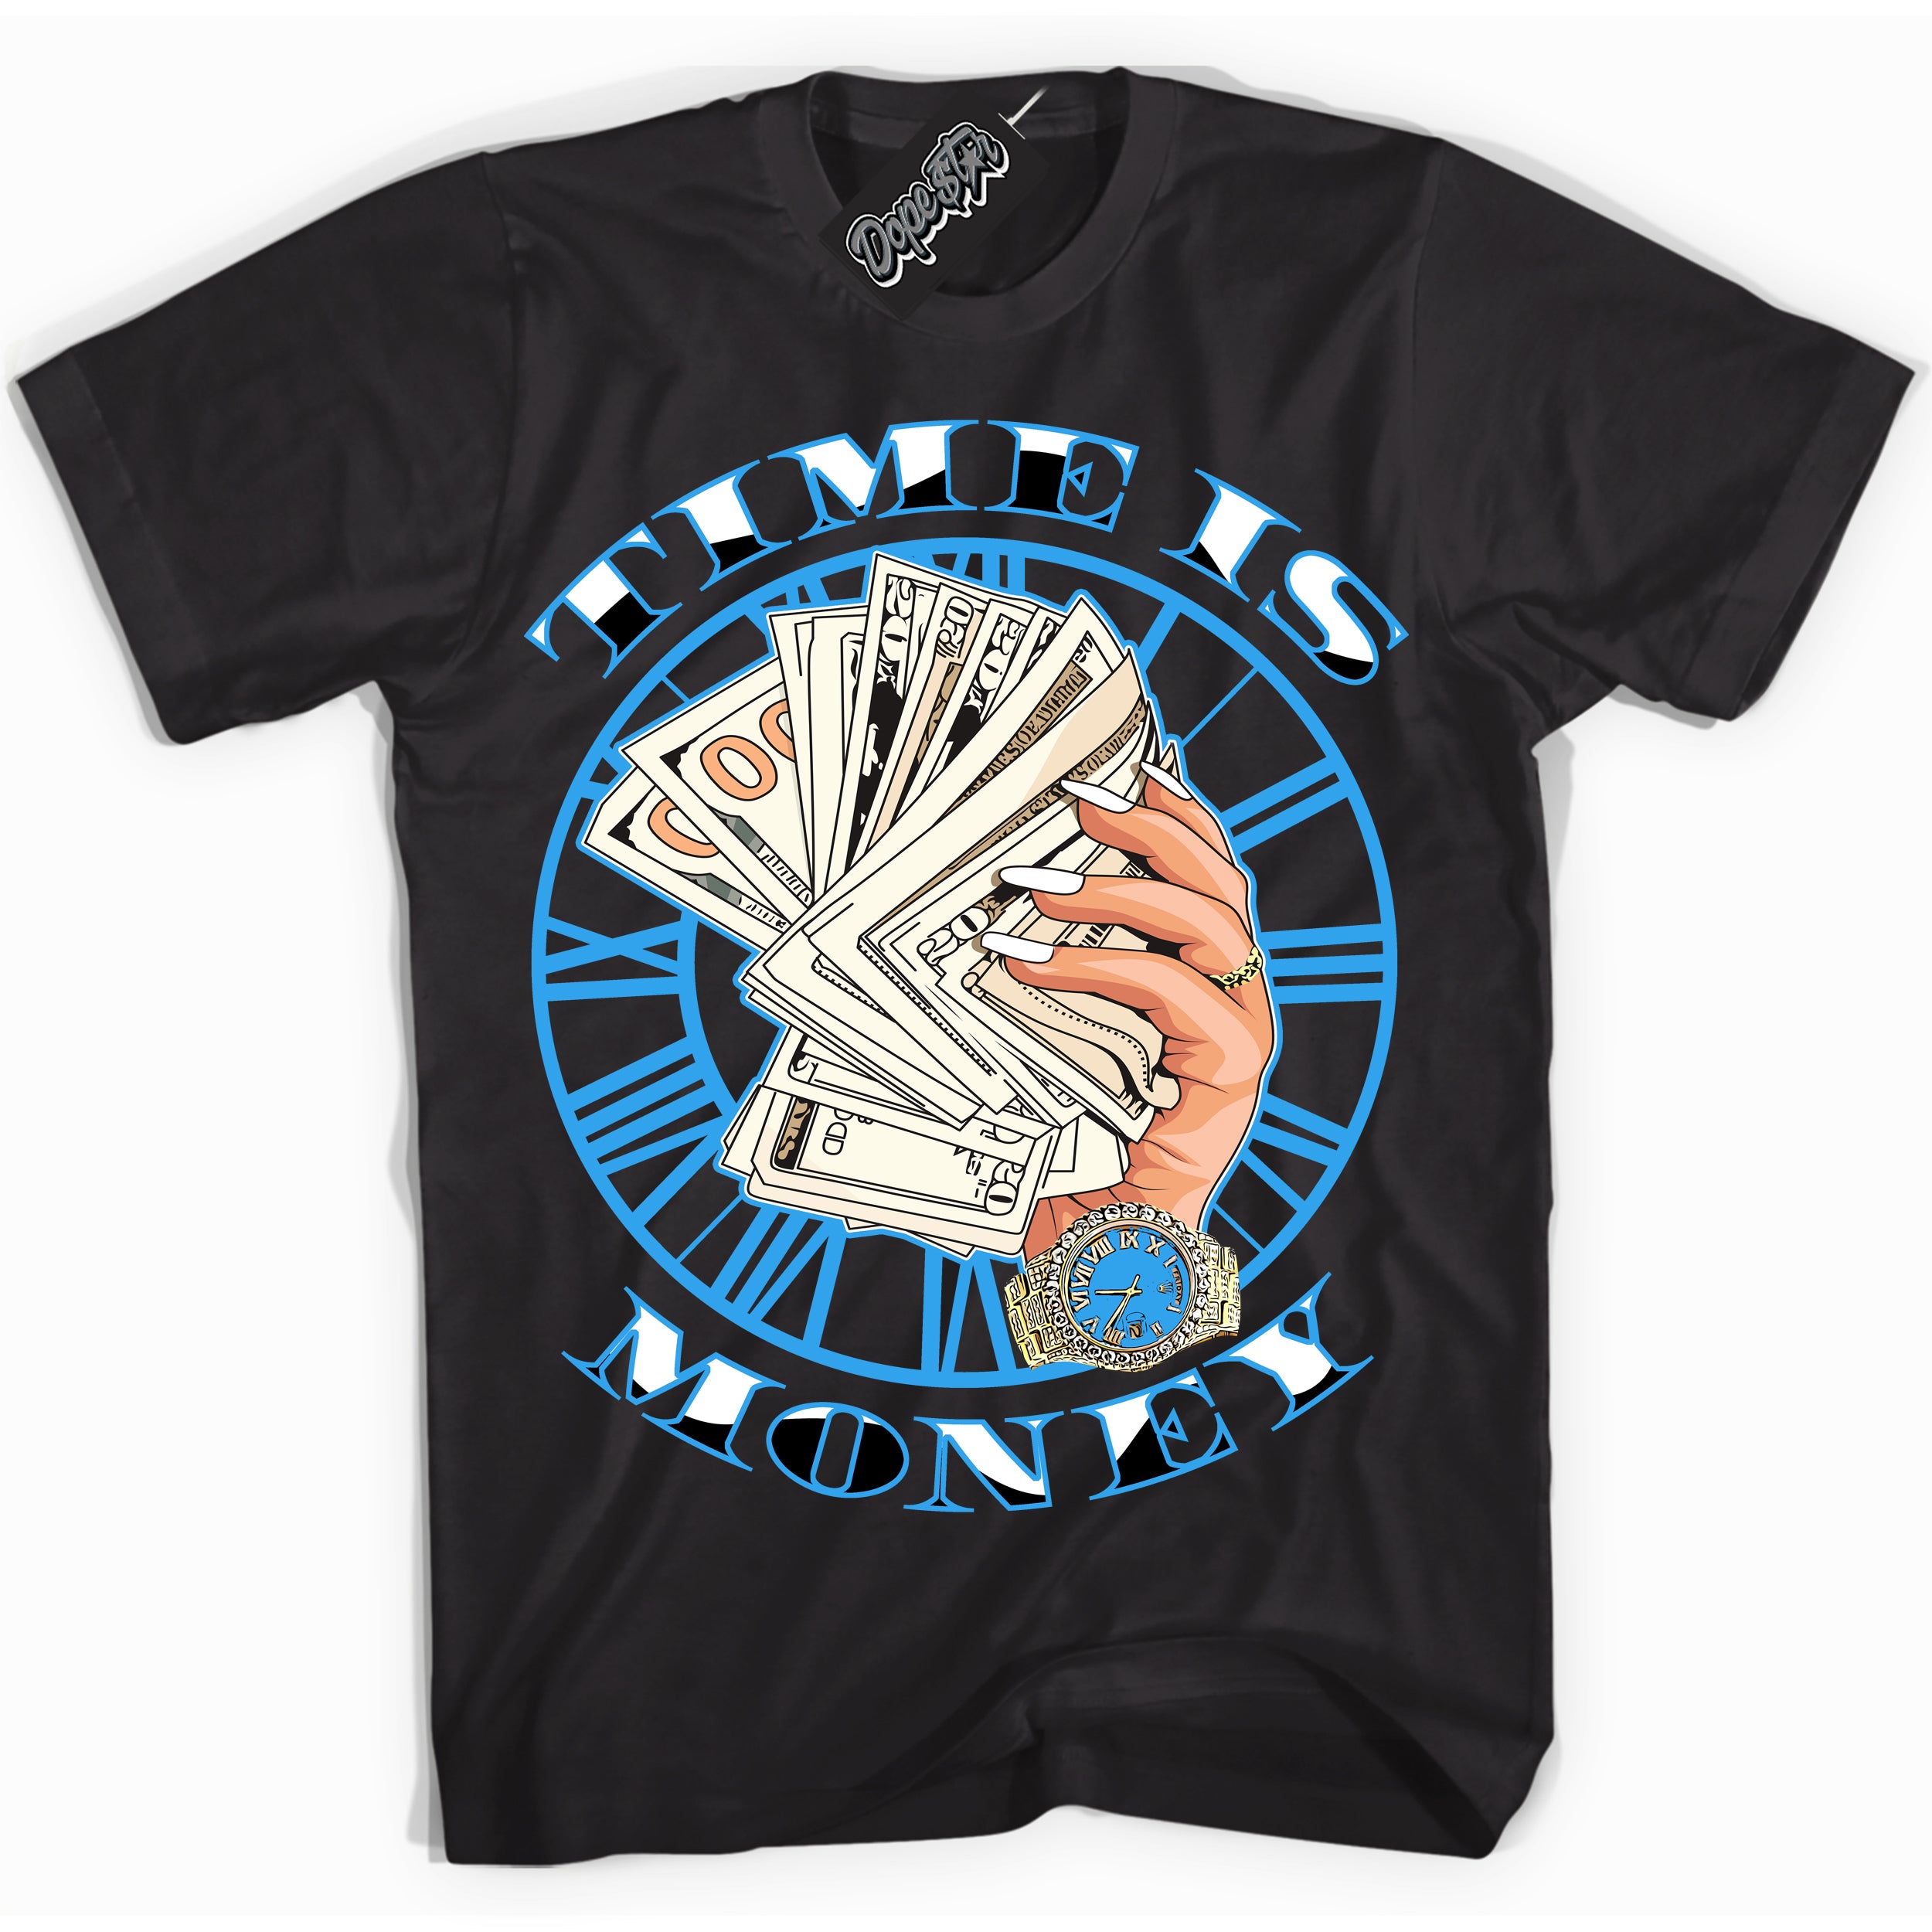 Cool Black graphic tee with “ Time Is Money ” design, that perfectly matches Powder Blue 9s sneakers 